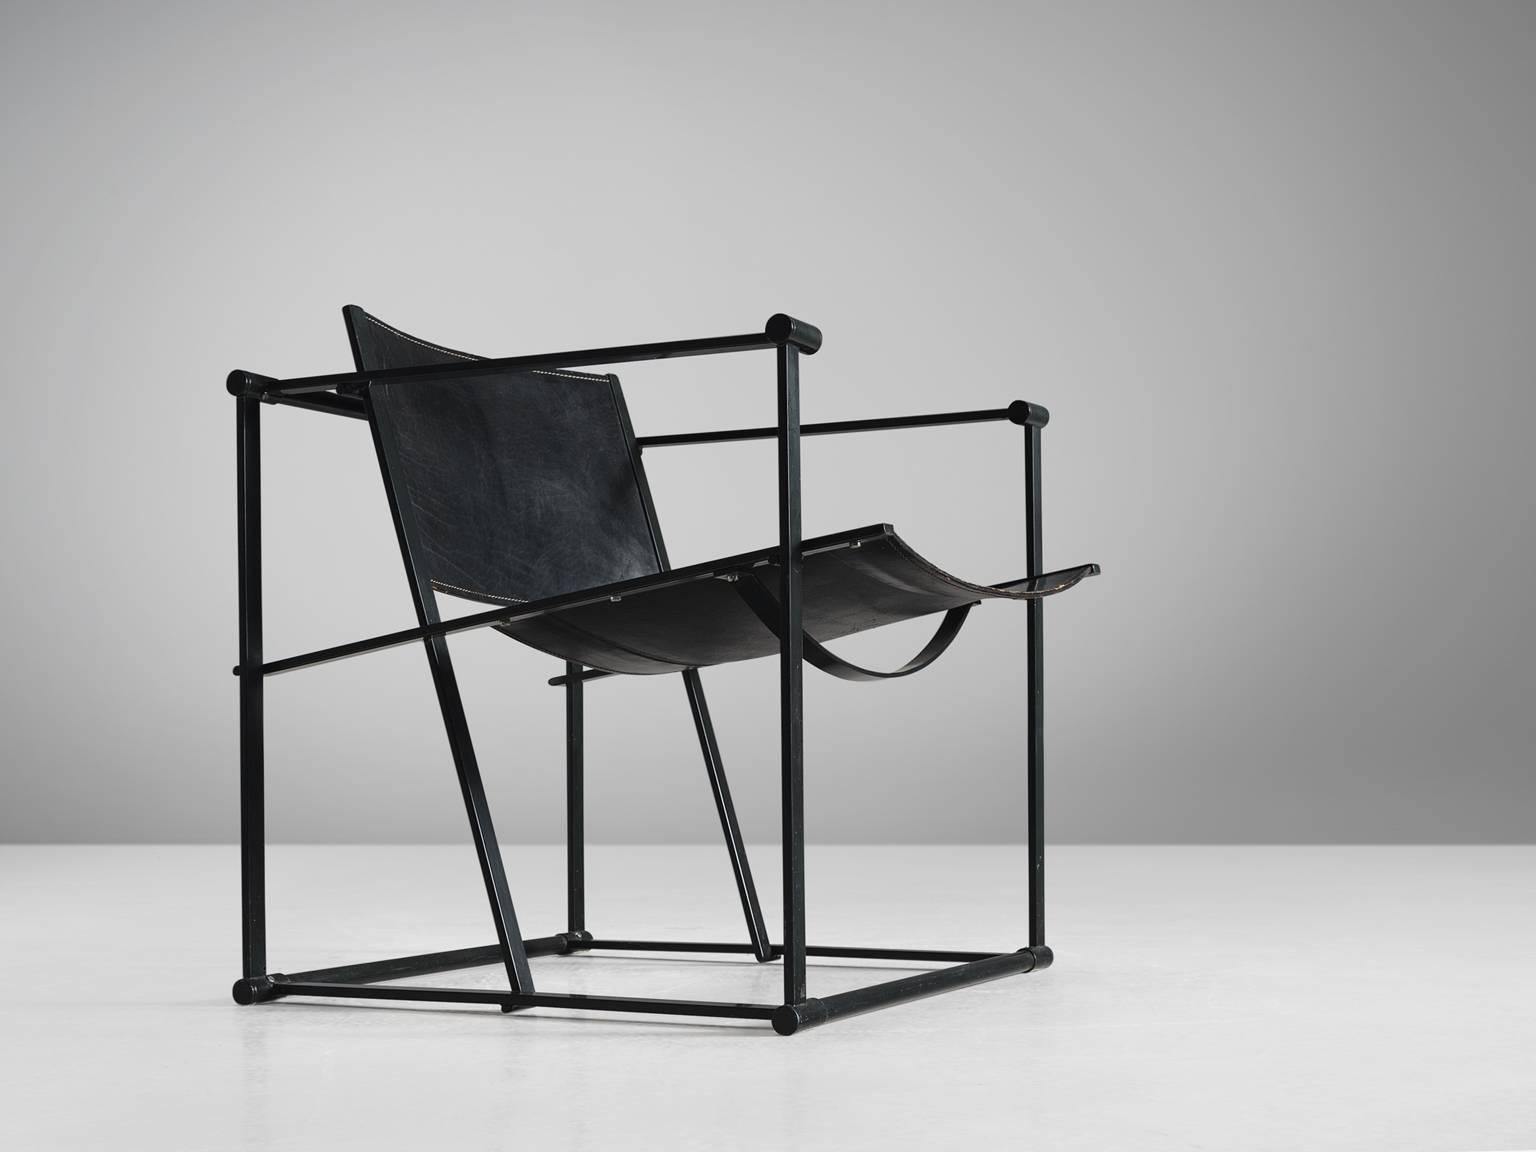 Radboud Van Beekum for Pastoe, armchair model FM61, in steel and leather, the Netherlands, 1981. 

All black version of the cubist armchairs by Radboud Van Beekum. This model was first presented at the 1980 Triennial in Poznan. After which Pastoe